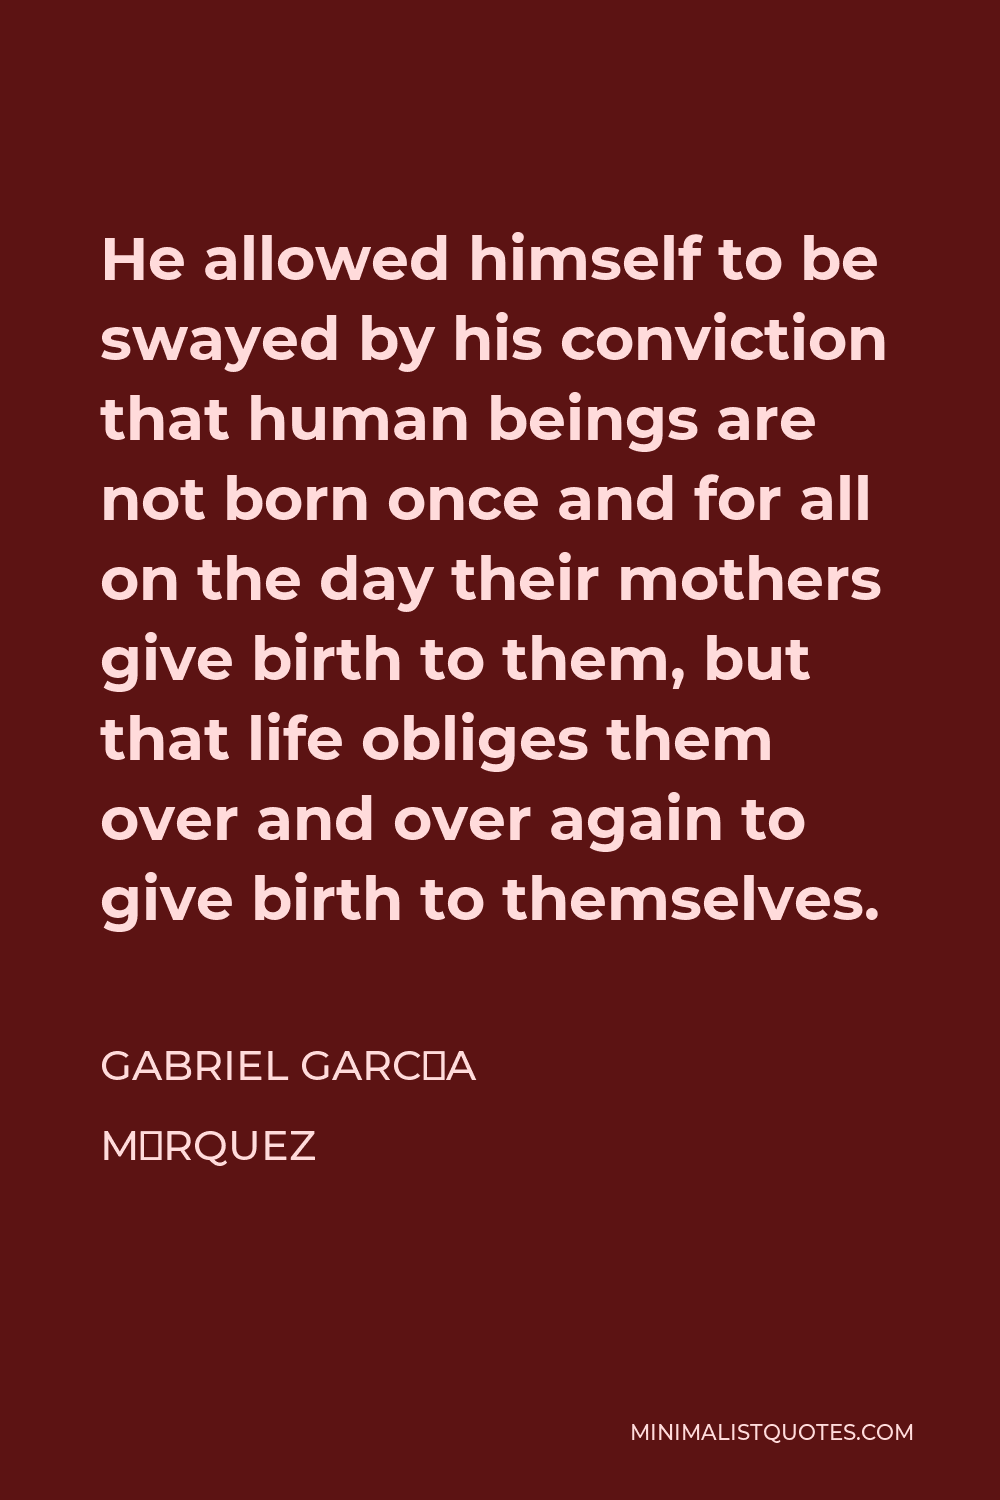 Gabriel García Márquez Quote - He allowed himself to be swayed by his conviction that human beings are not born once and for all on the day their mothers give birth to them, but that life obliges them over and over again to give birth to themselves.